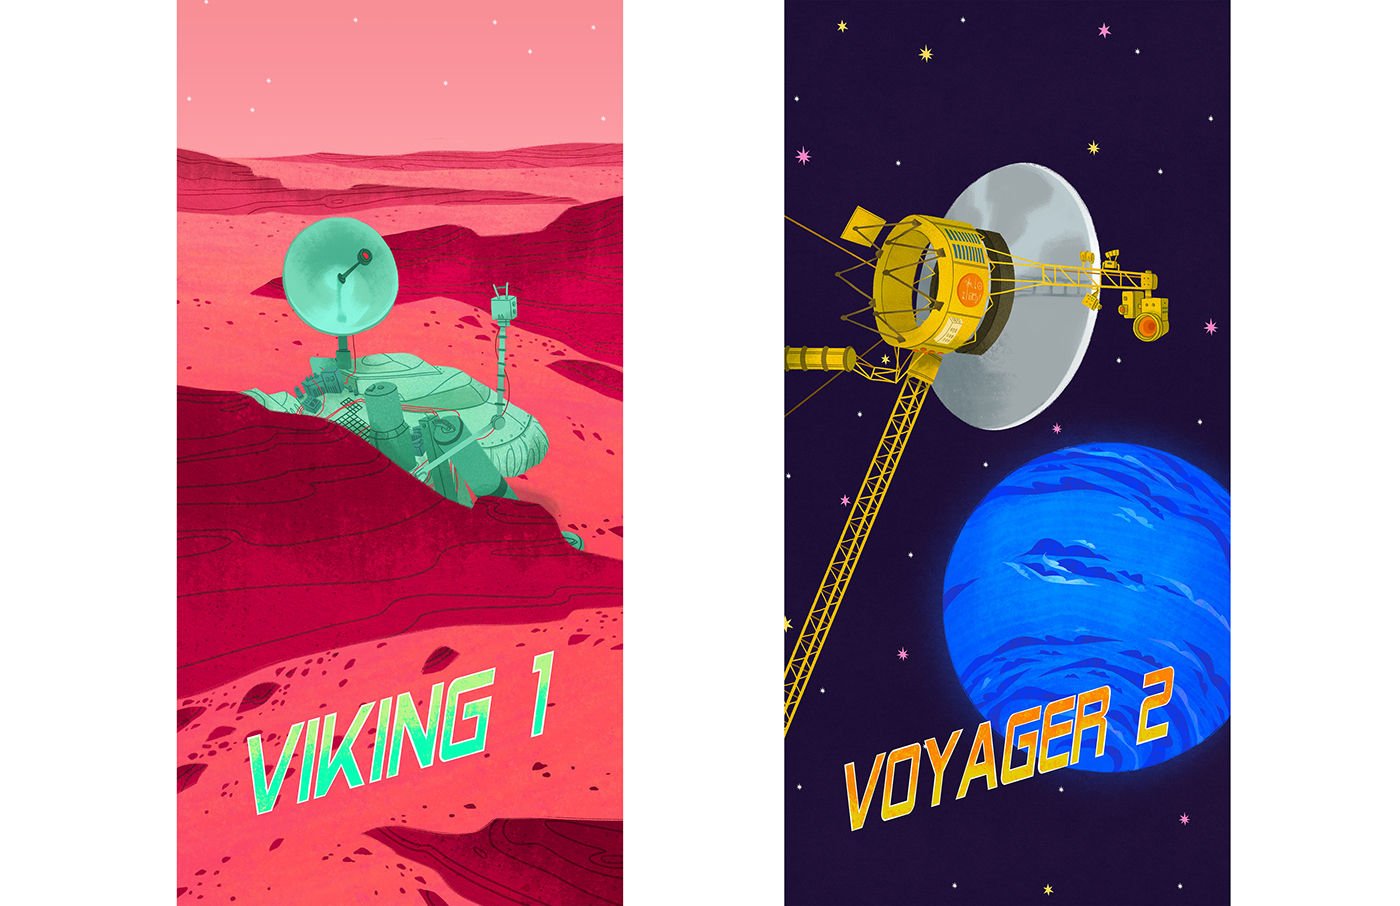 spacecrafts nasa cassini voyager2 viking1 hubble Space  solar system